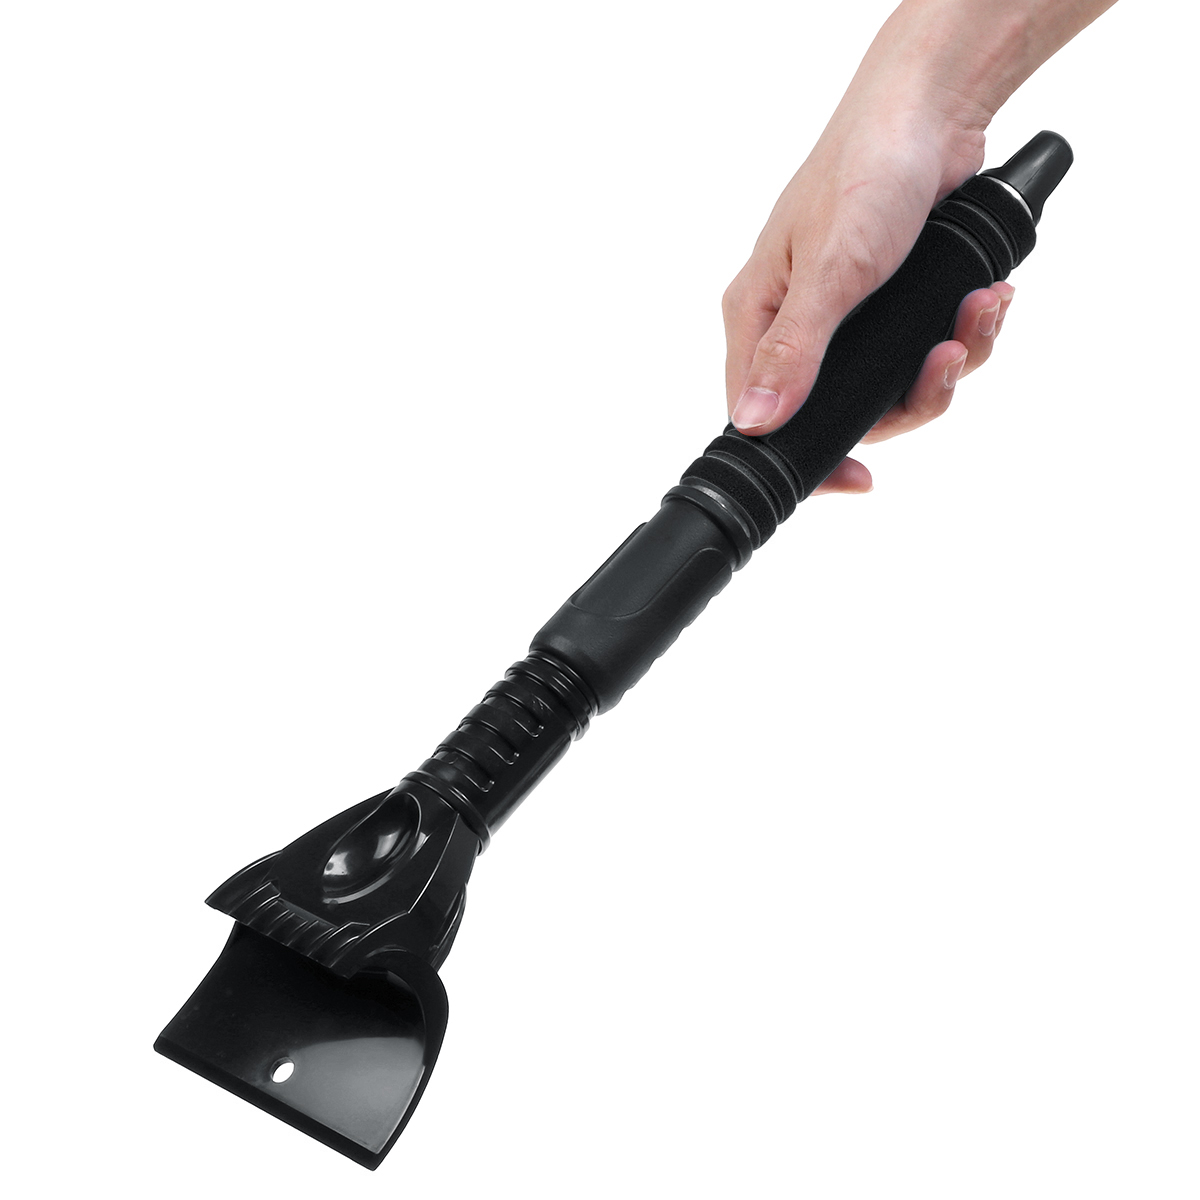 56CM-Telescopic-Rotating-Snow-Shovel-With-Gloves-Vehicle-Winter-Shoveling-Snow-Tools-1786471-10